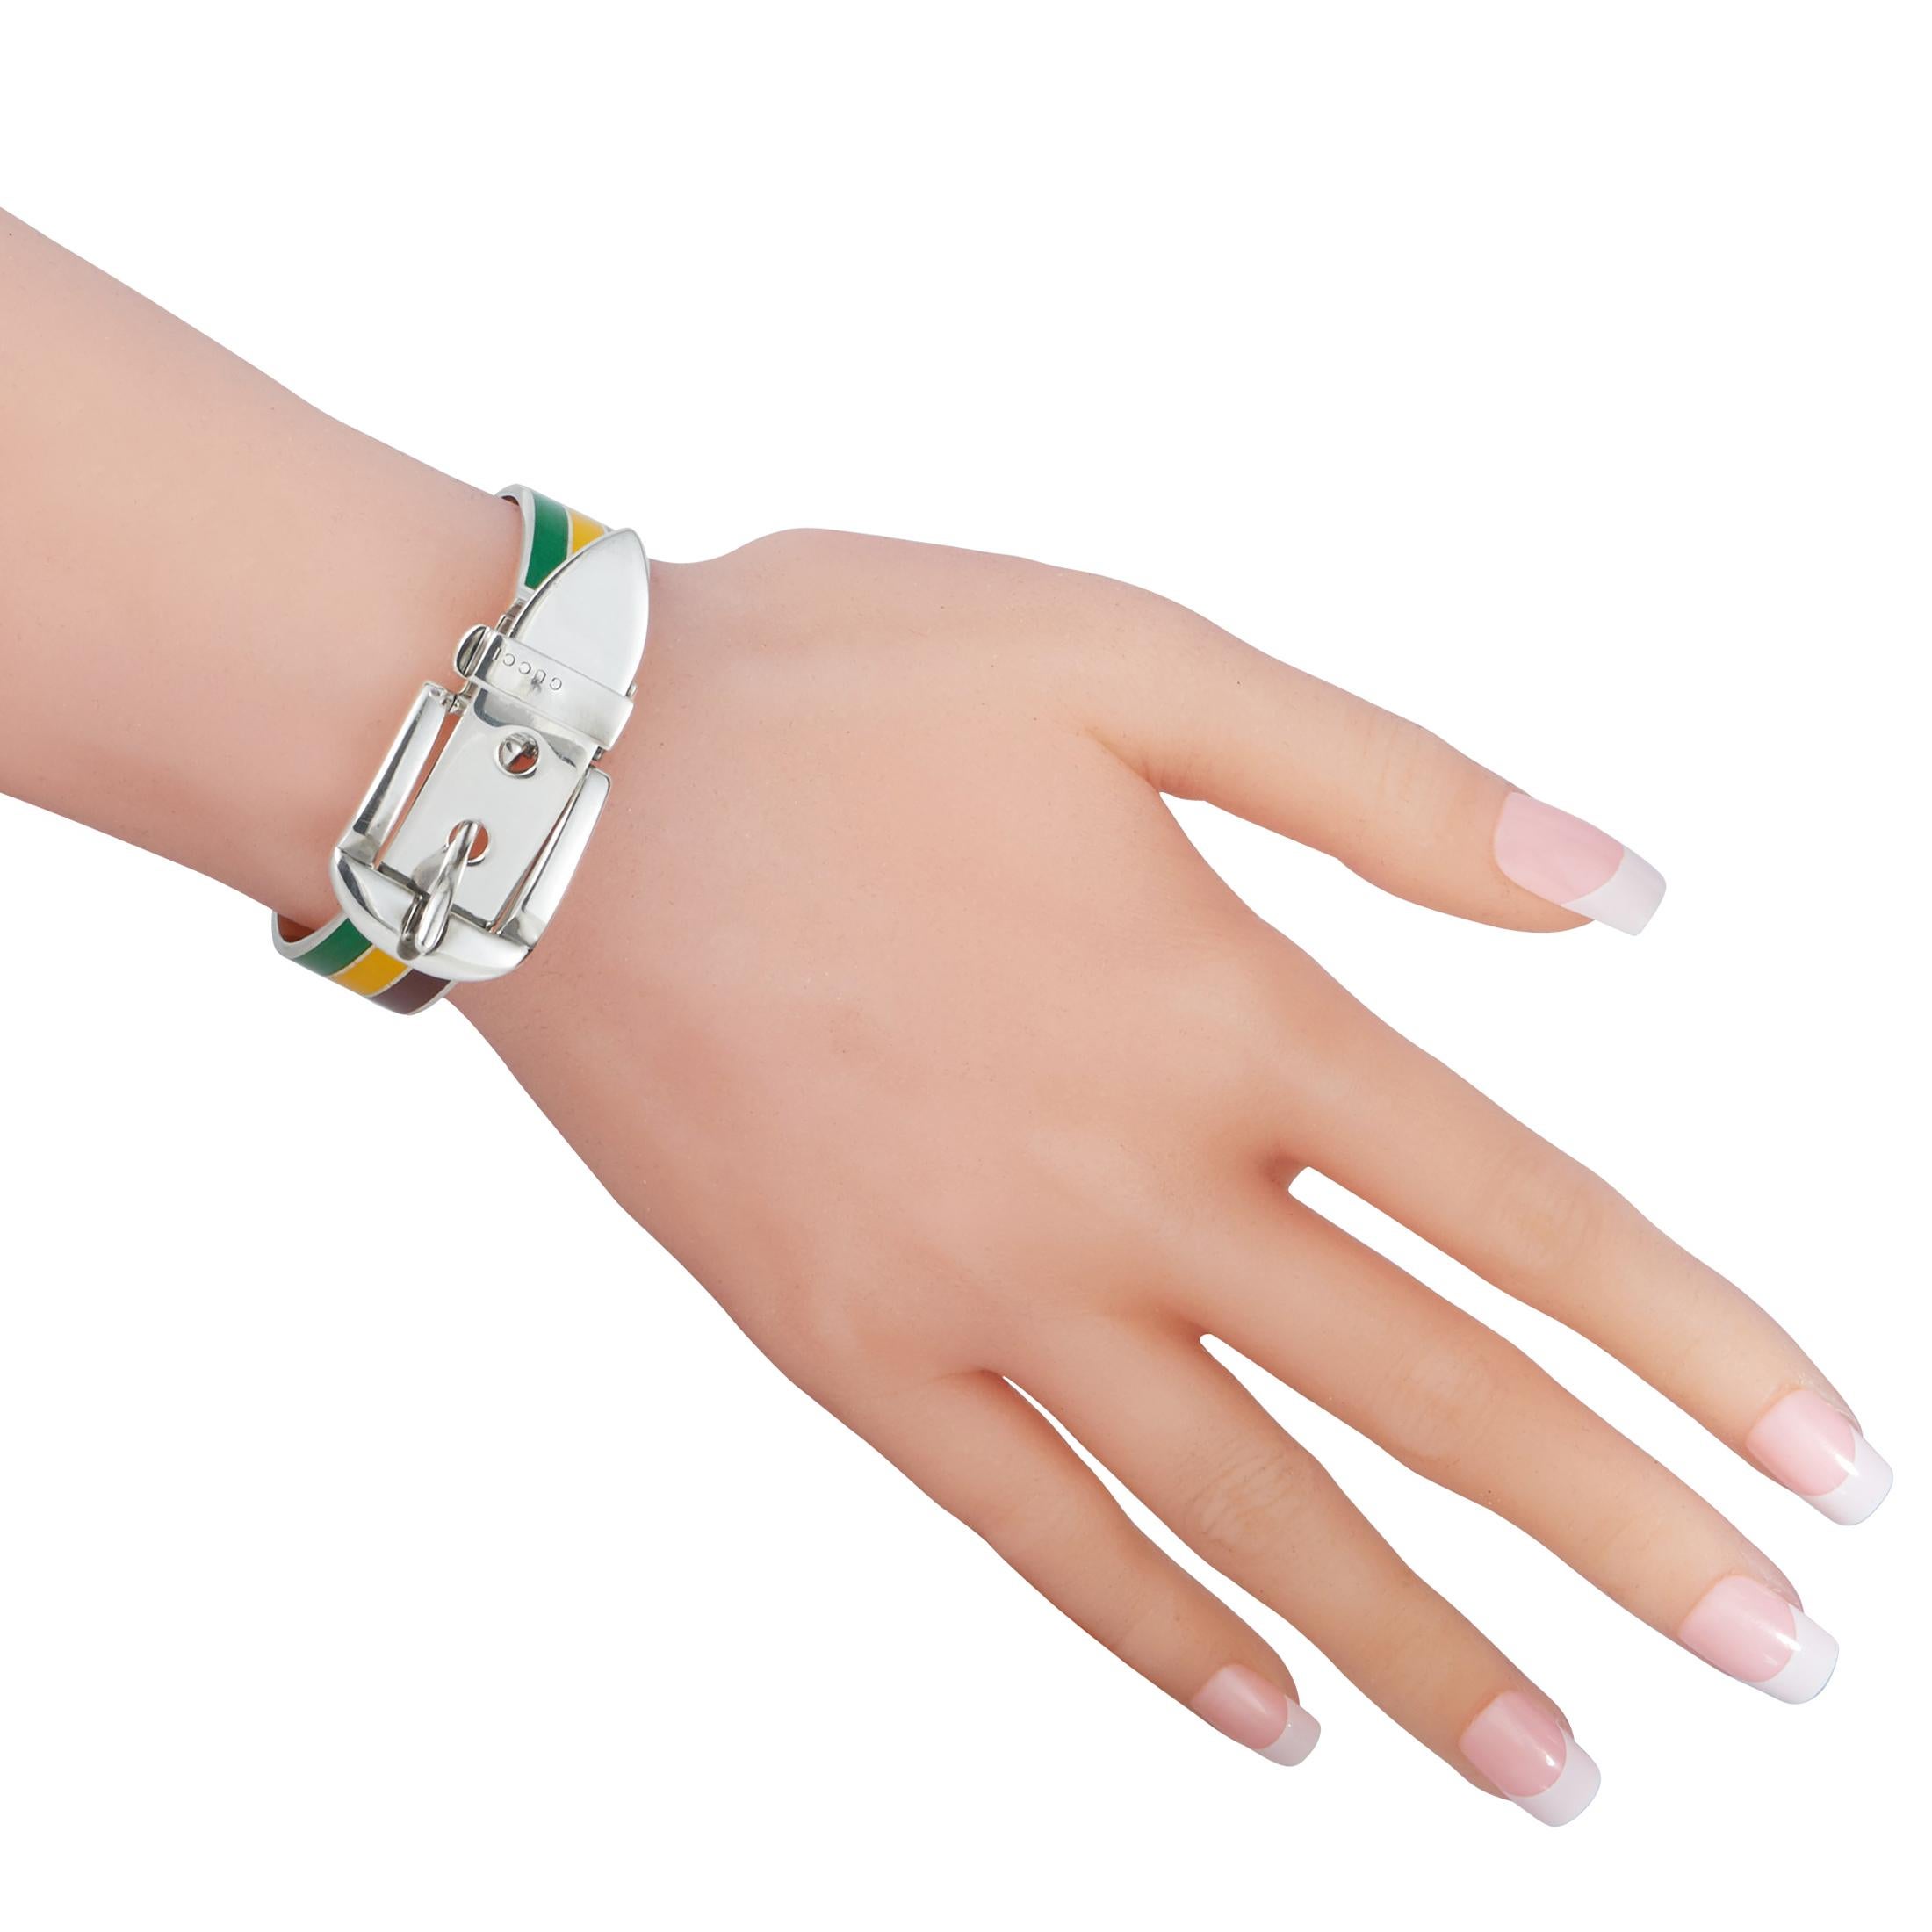 The Gucci “Garden” bracelet is crafted from sterling silver and embellished with burgundy, yellow and green enamel. The bracelet weighs 56.1 grams and measures 7” in length.

This item is offered in brand new condition.